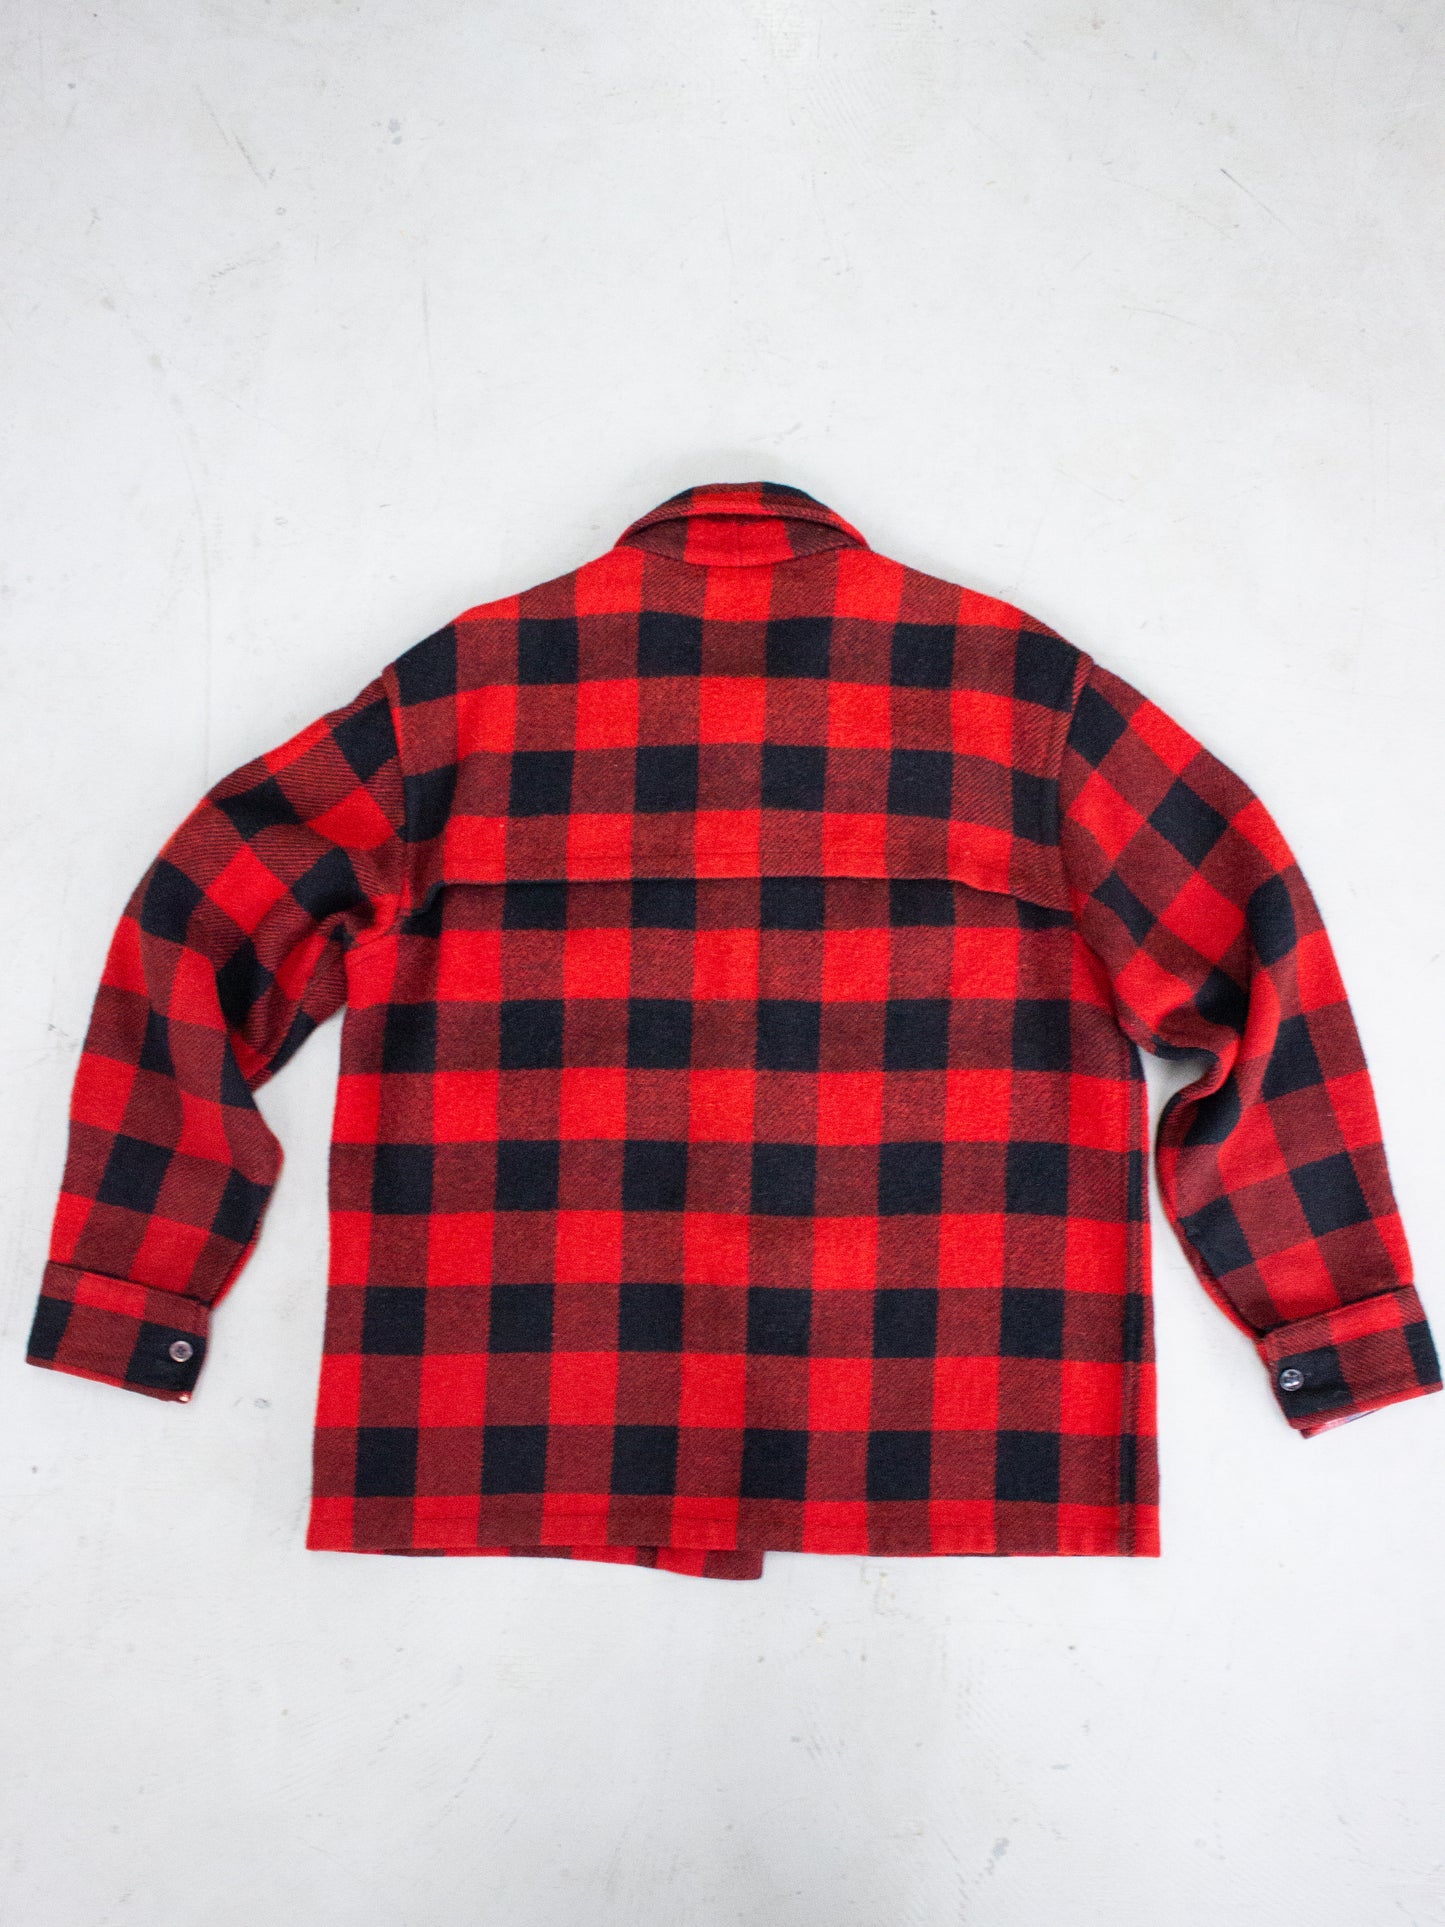 1970's Cockatoo Red Buffalo Plaid Wool Flannel (Large)